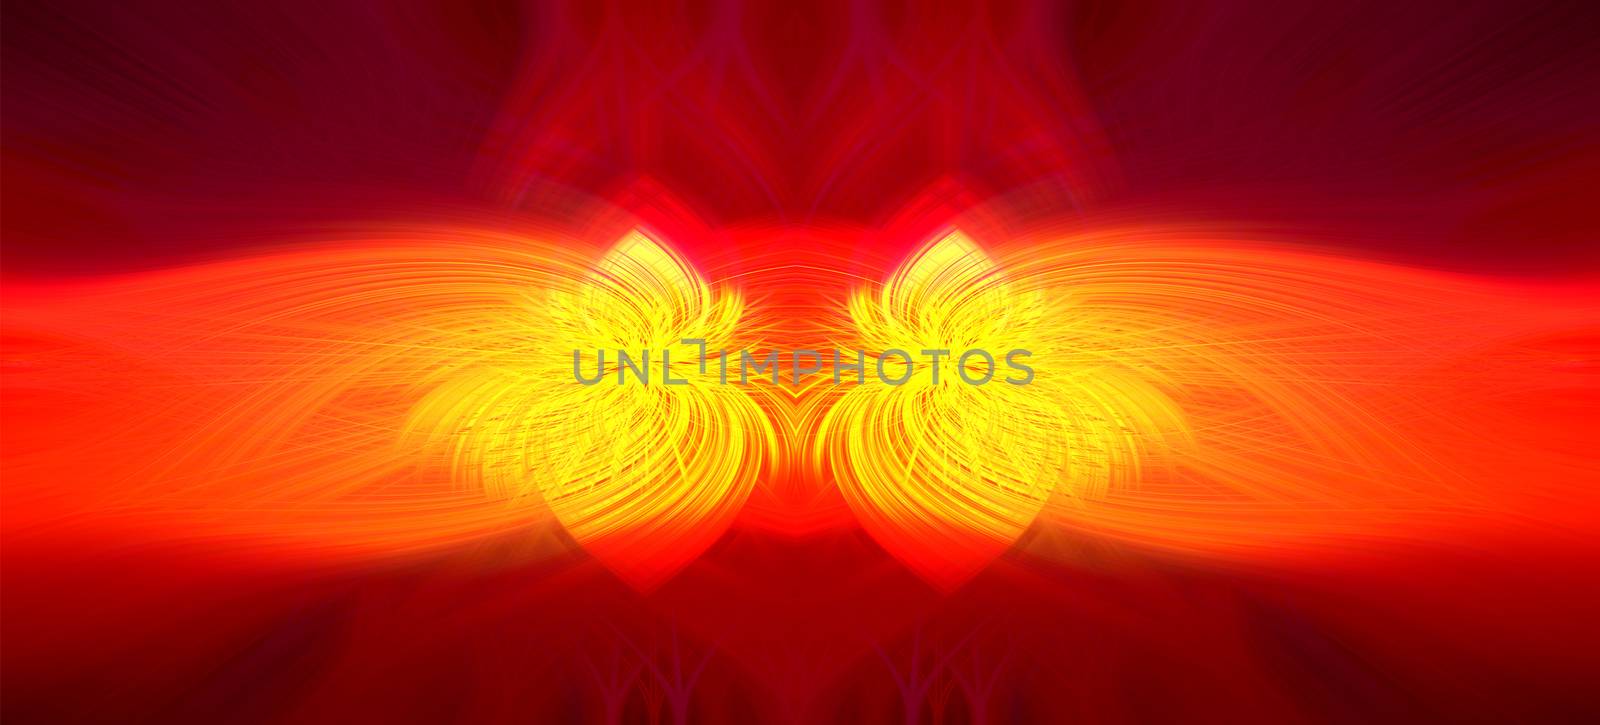 Beautiful abstract intertwined 3d fibers forming a shape of sparkle or flame. Yellow, bright red, and orange colors. Illustration.